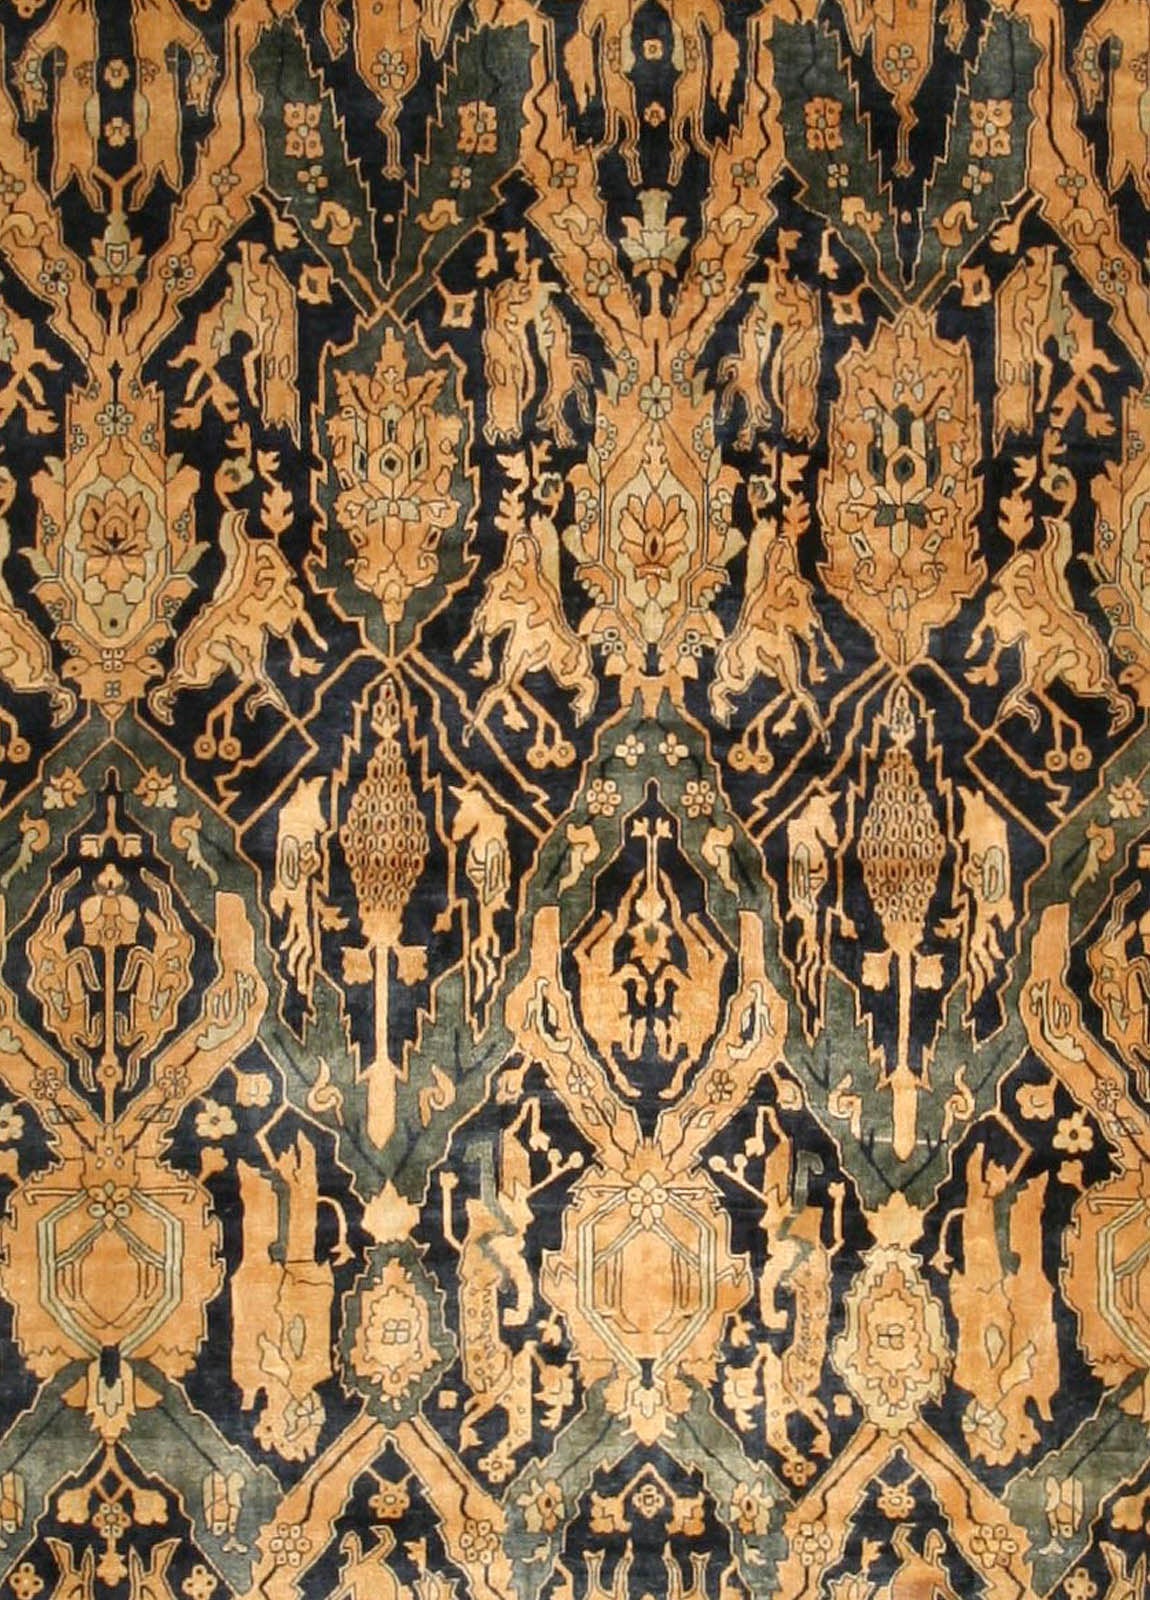 Hand-Woven Antique Indian Rug